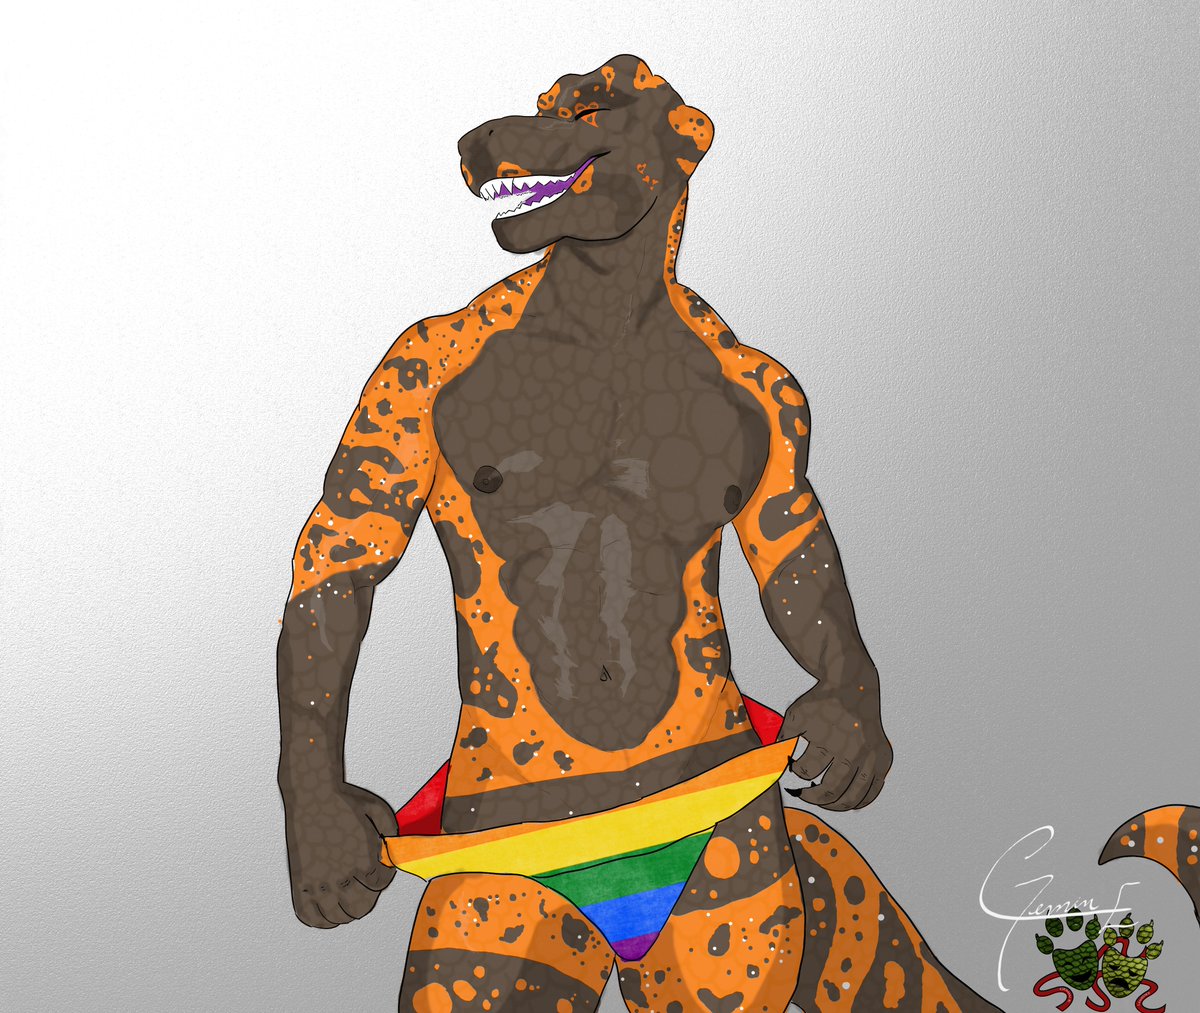 Looks like a certain Gila Monster I know is ready and really excited for pride month, he got new undies and didn't hesitate on getting a photoshoot session!! #ScalieFurries #FurriesPride #LoveIsLoveFurry